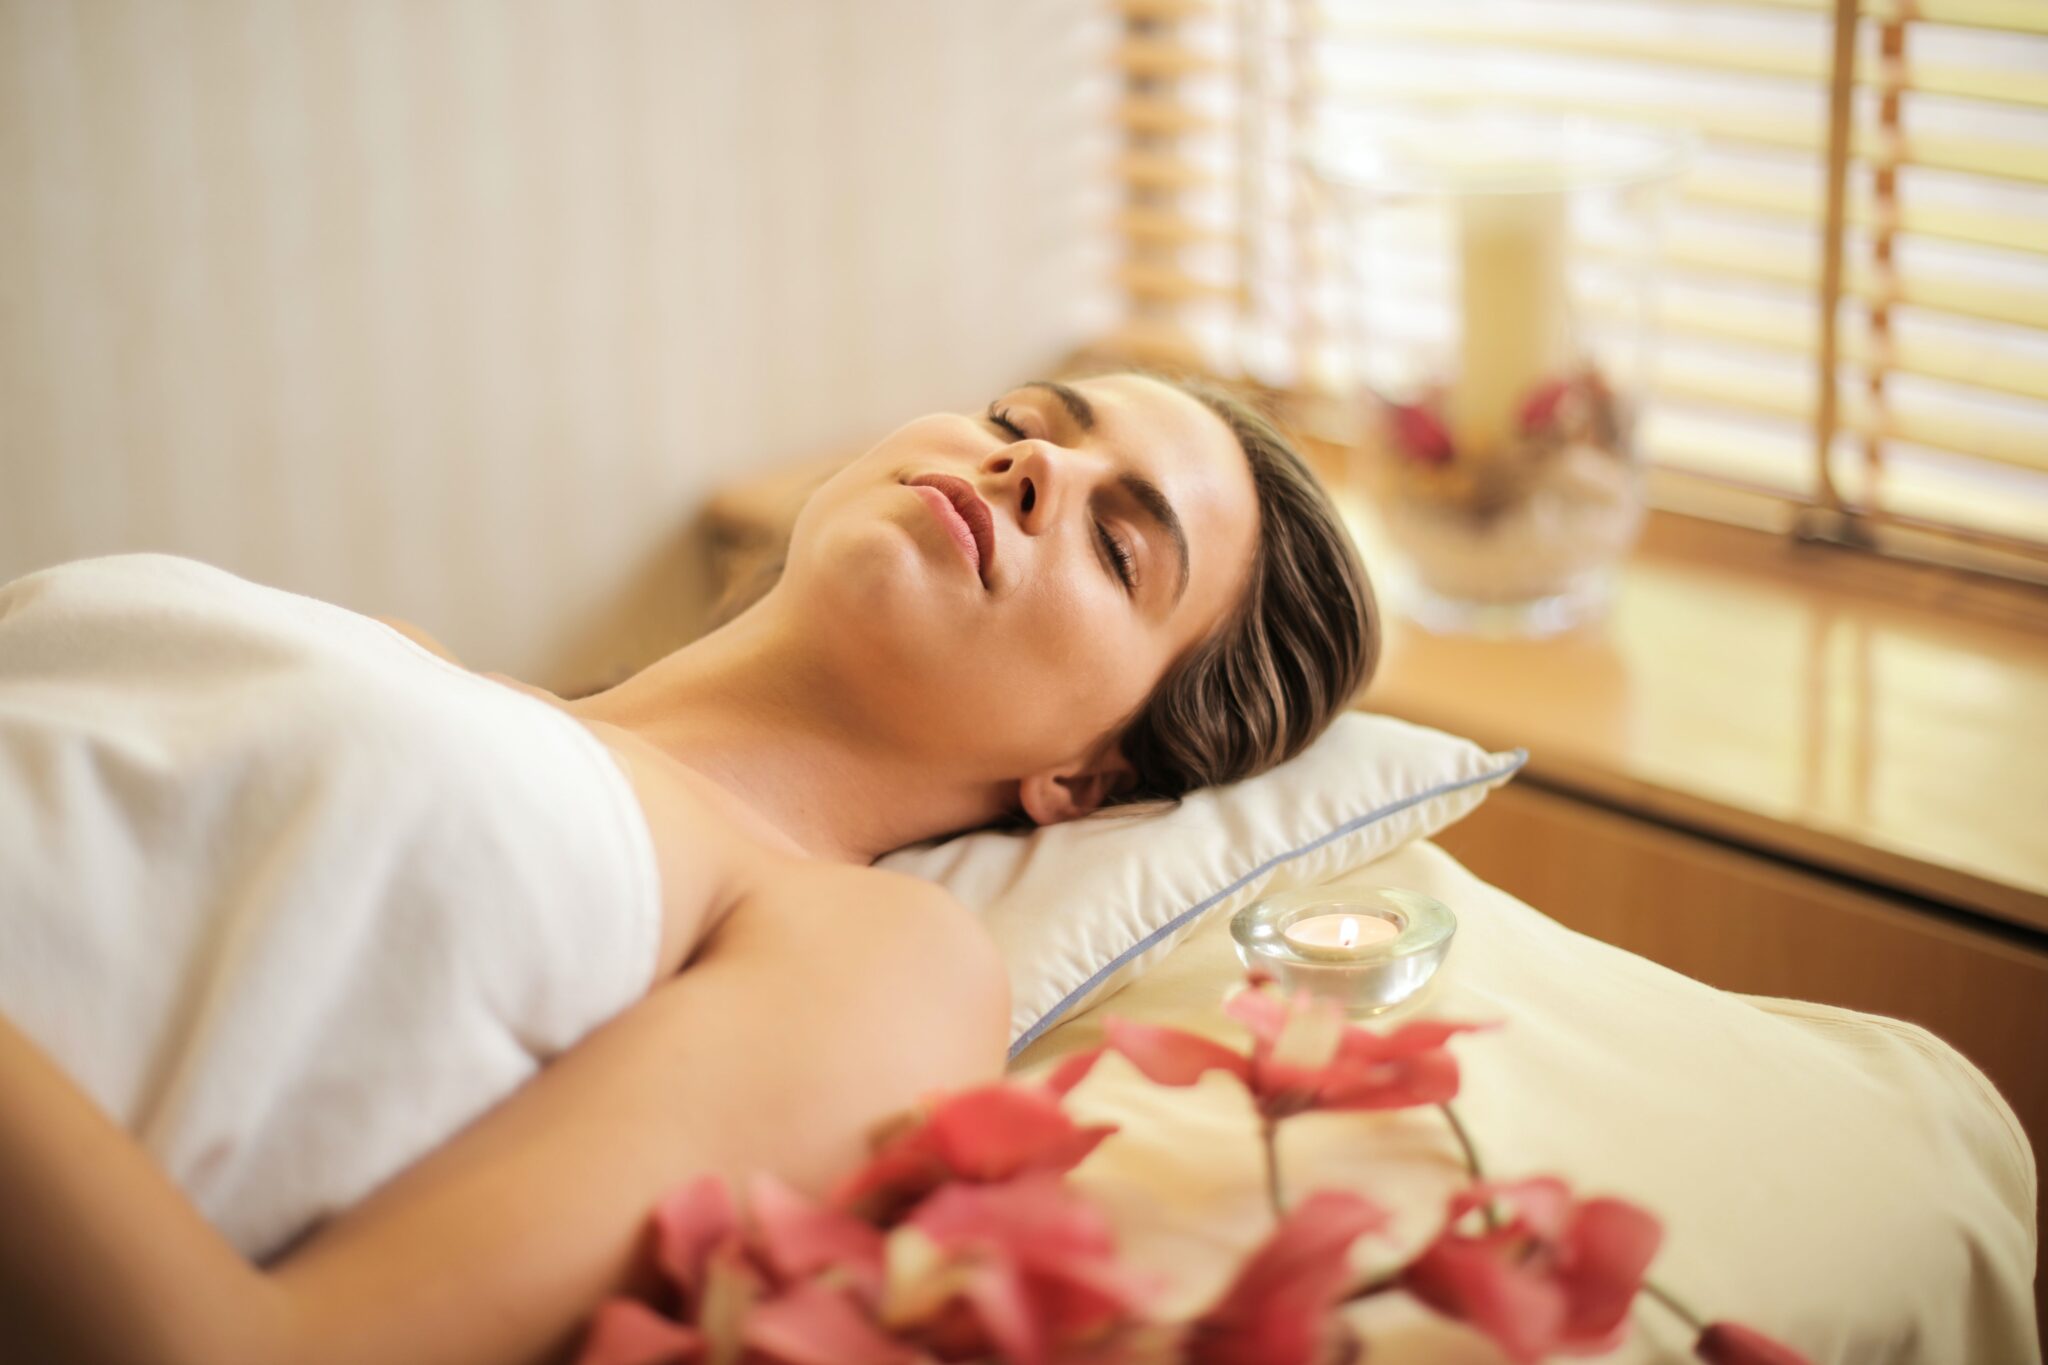 Spa Injuries Your Rights and Legal Options